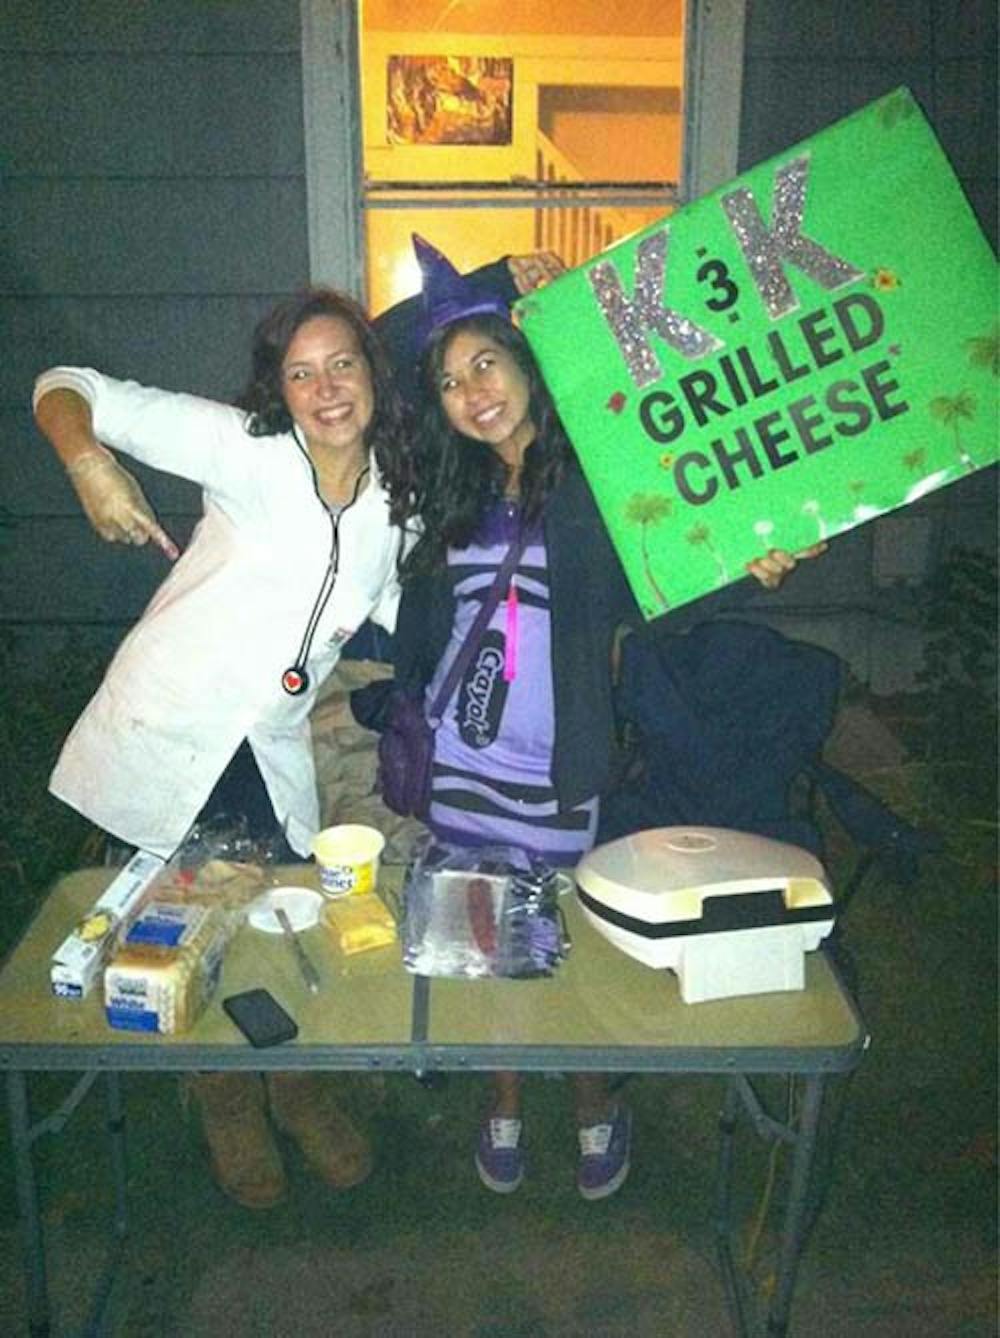 Katie Simmons and Kayla Hernandez of K&K Grilled Cheese pose beside their grilled cheese stand. The two have raised around $800 to put toward a volunteer trip to Nicaragua. PHOTO PROVIDED BY KATIE SIMMONS